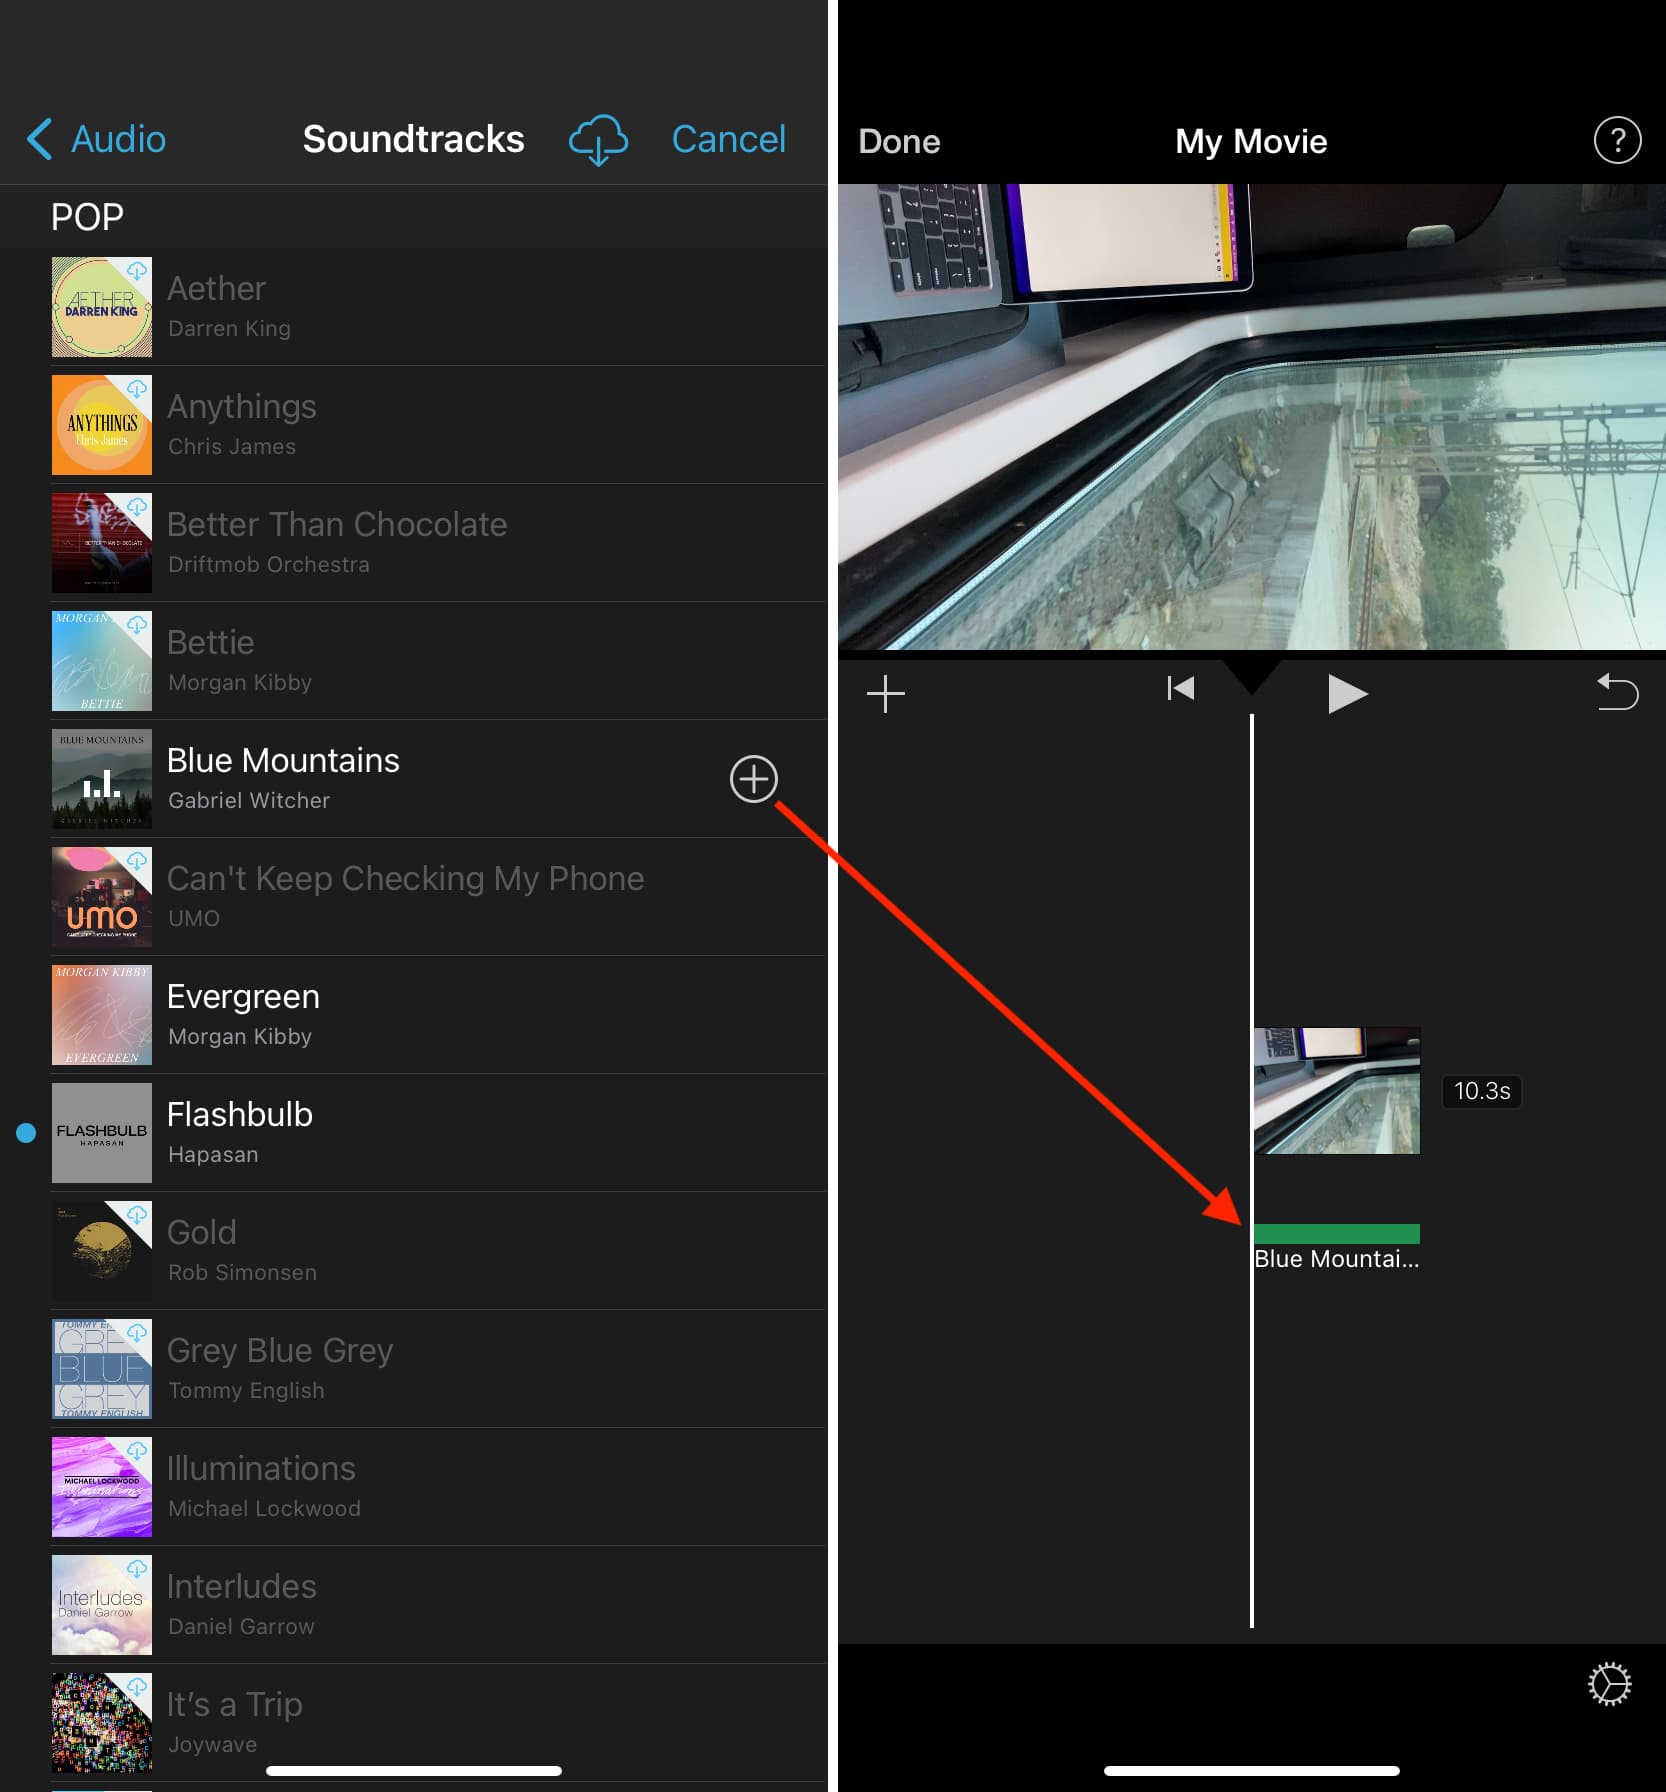 Tap the plus button to add selected music to iMovie on iPhone